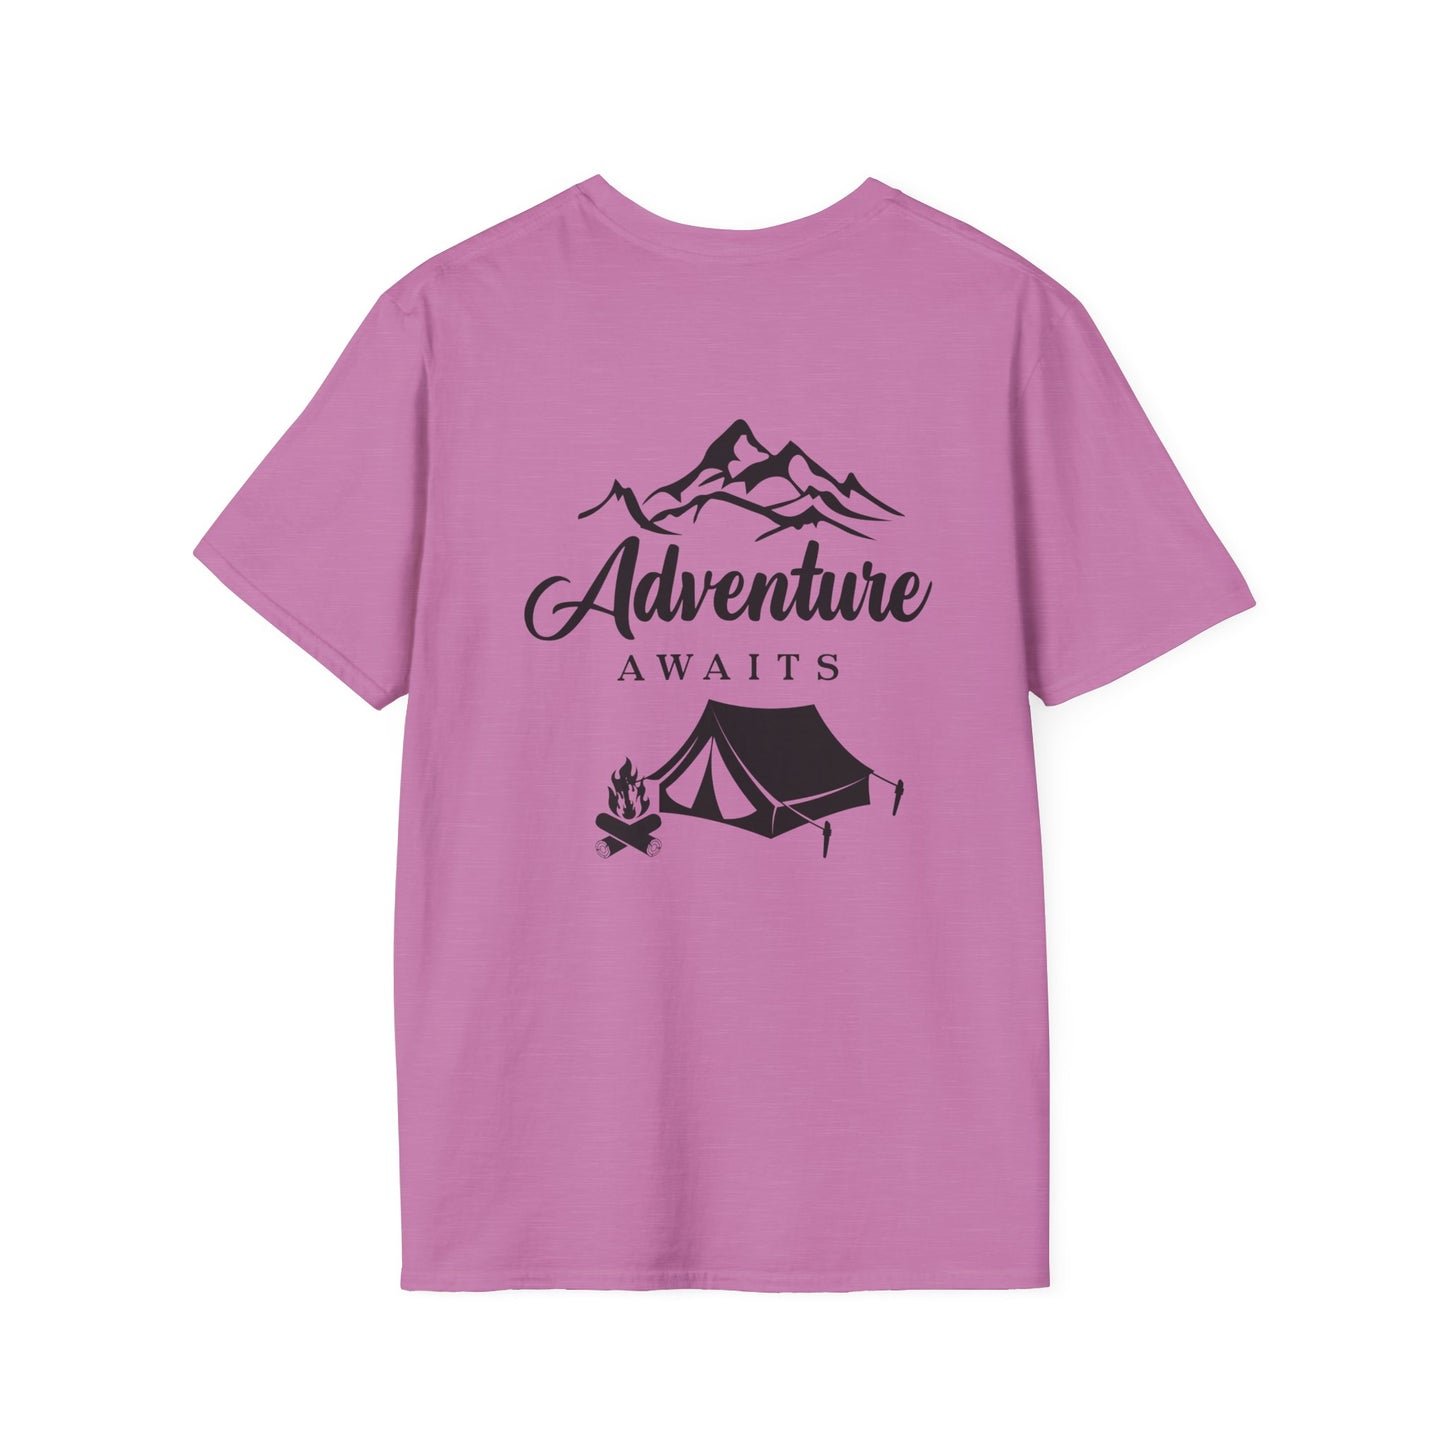 Adventure awaits Unisex Softstyle T-Shirt Free Shipping to USA, AU and NZ